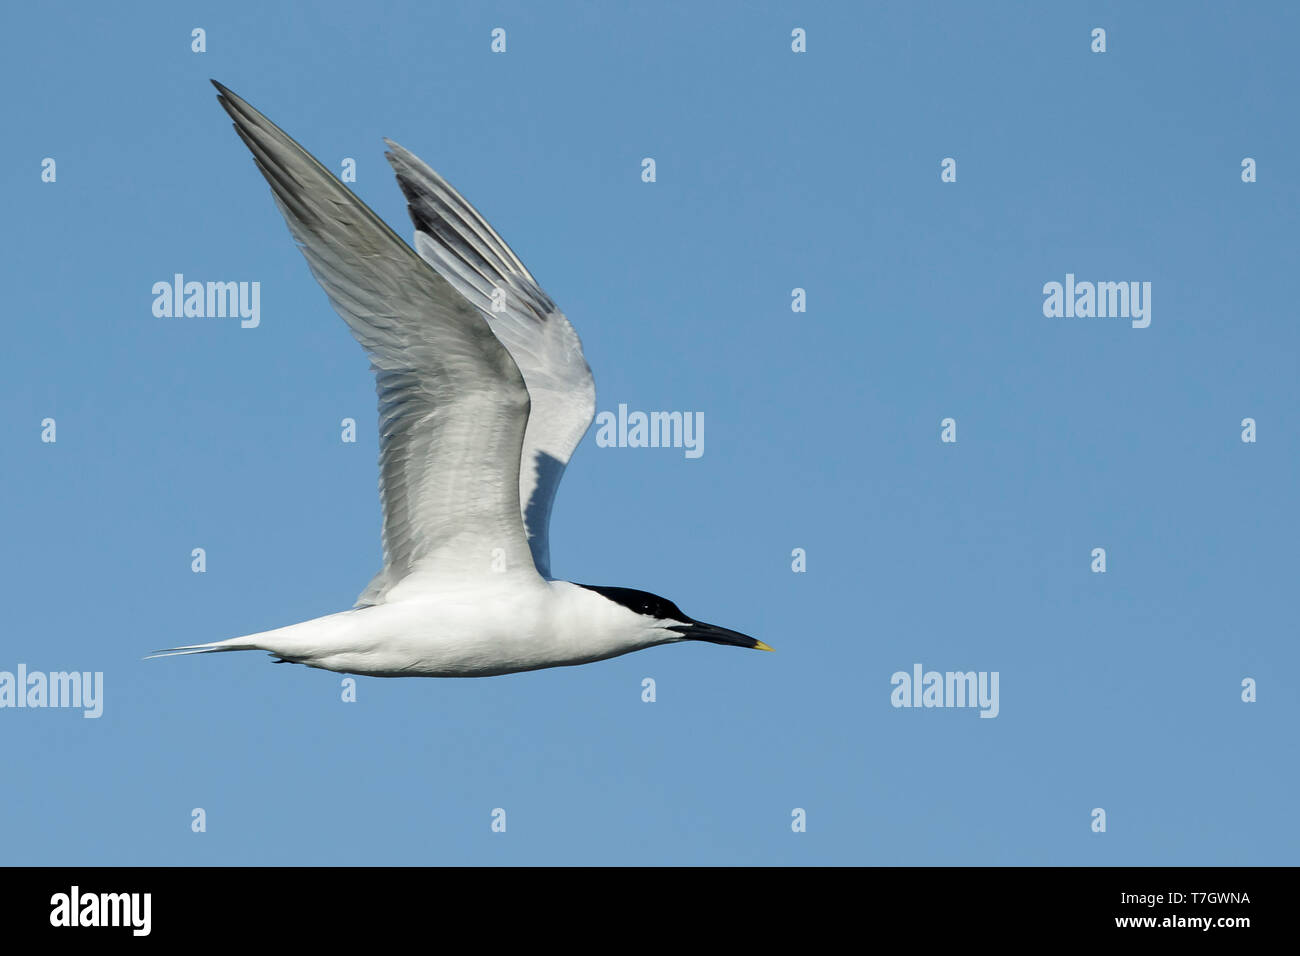 Adult Cabot's Tern (Thalasseus acuflavidus) in flight against a blue sky at Galveston County, Texas, USA. Stock Photo